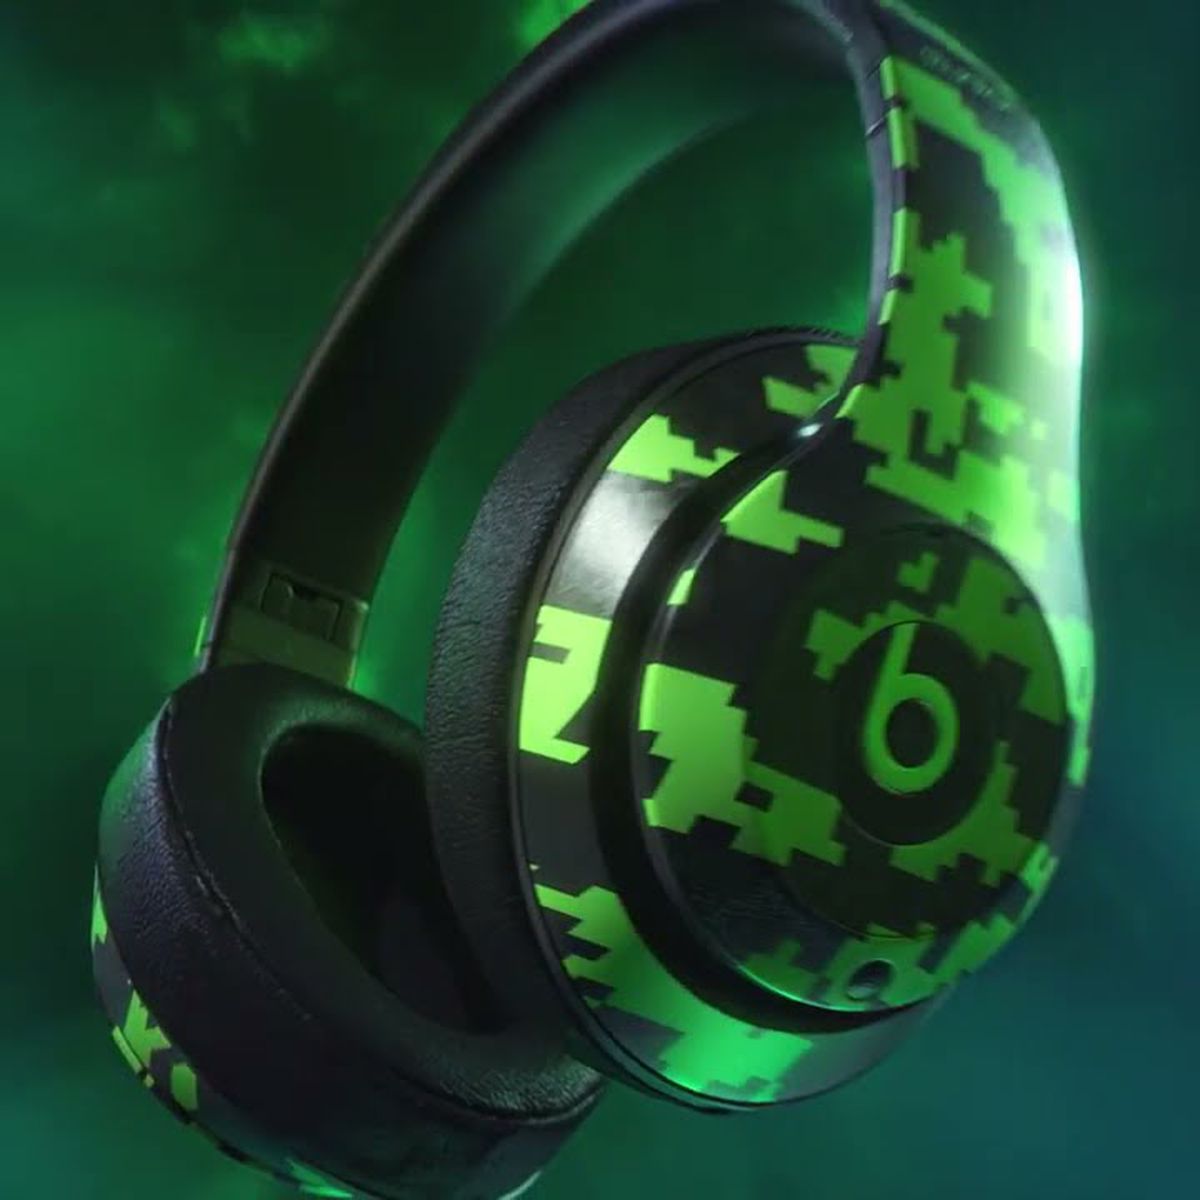 Apple Introduces Limited-Edition Neon Green Beats Studio3 in